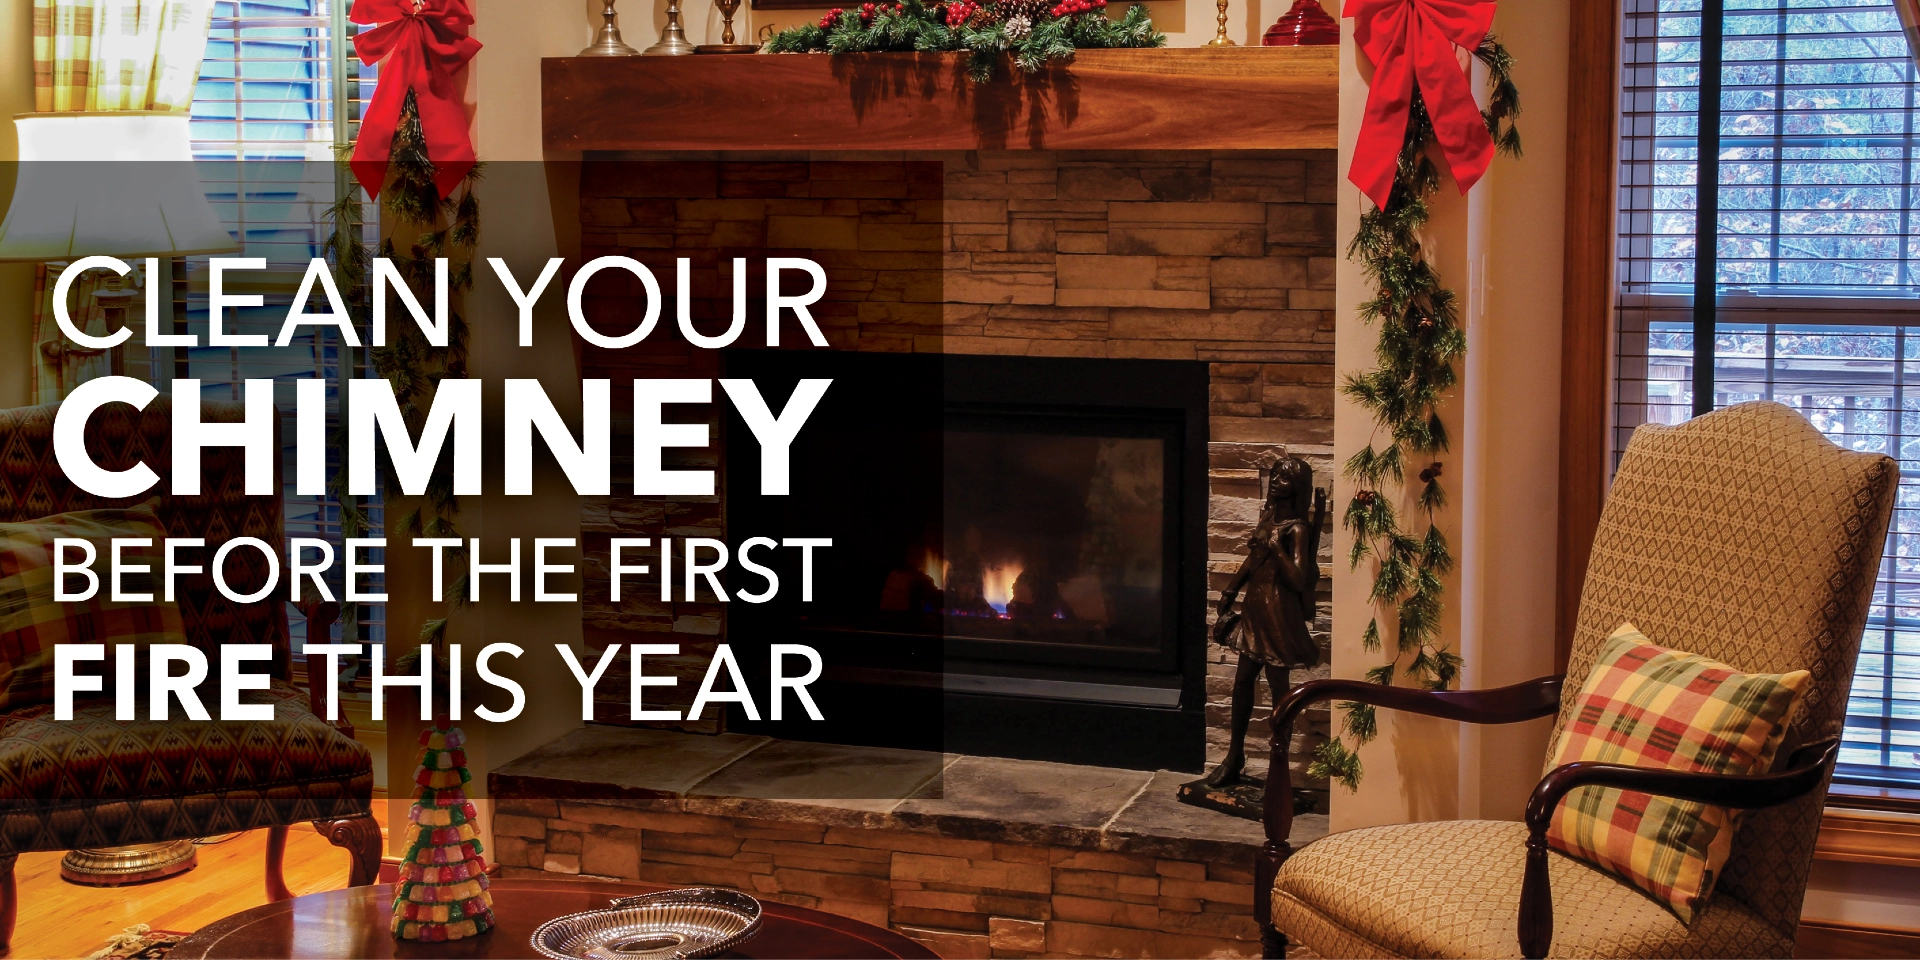 Cozy fireplace with text: "Clean your chimney before the first fire this year"